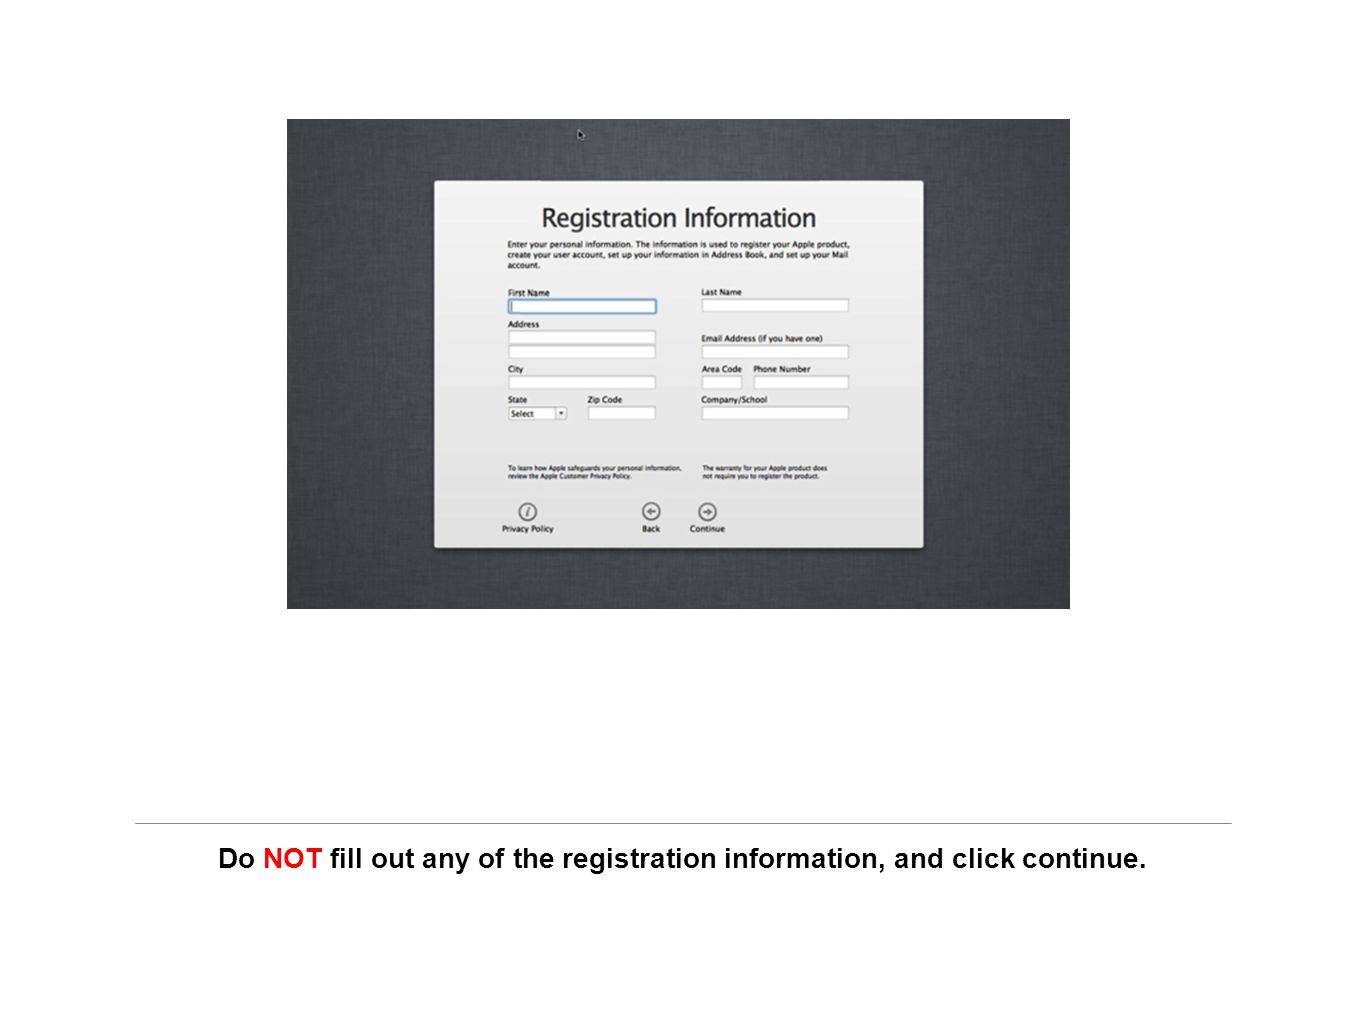 Do NOT fill out any of the registration information, and click continue.